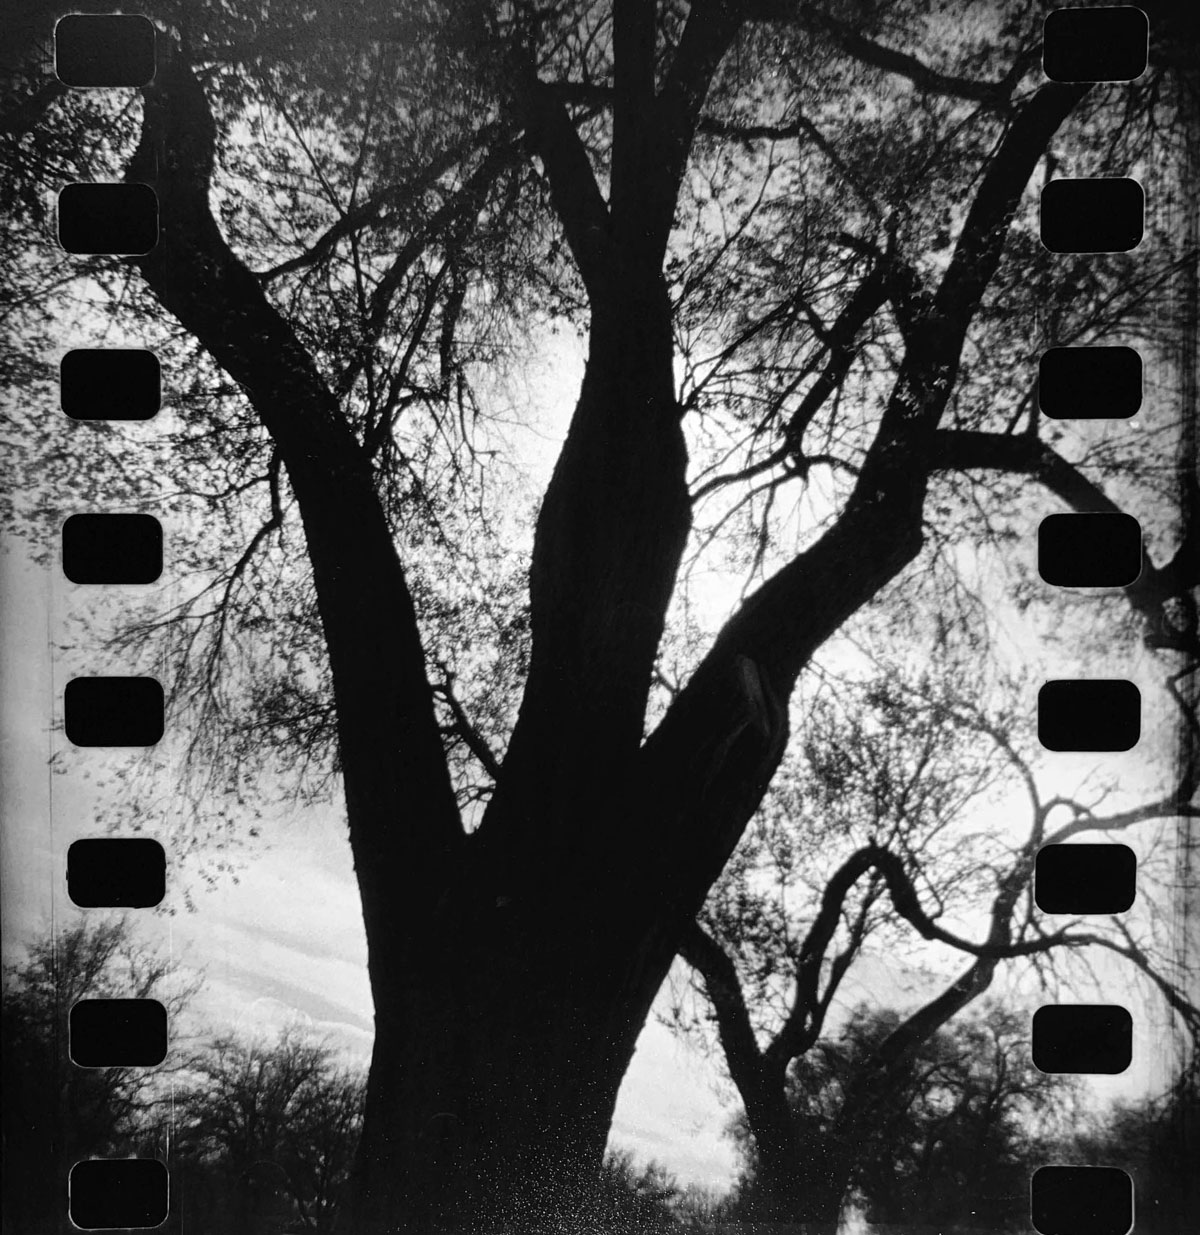 Black and white photo of a tree in the center of the image, film negative sprocket holes are visible on the sides.